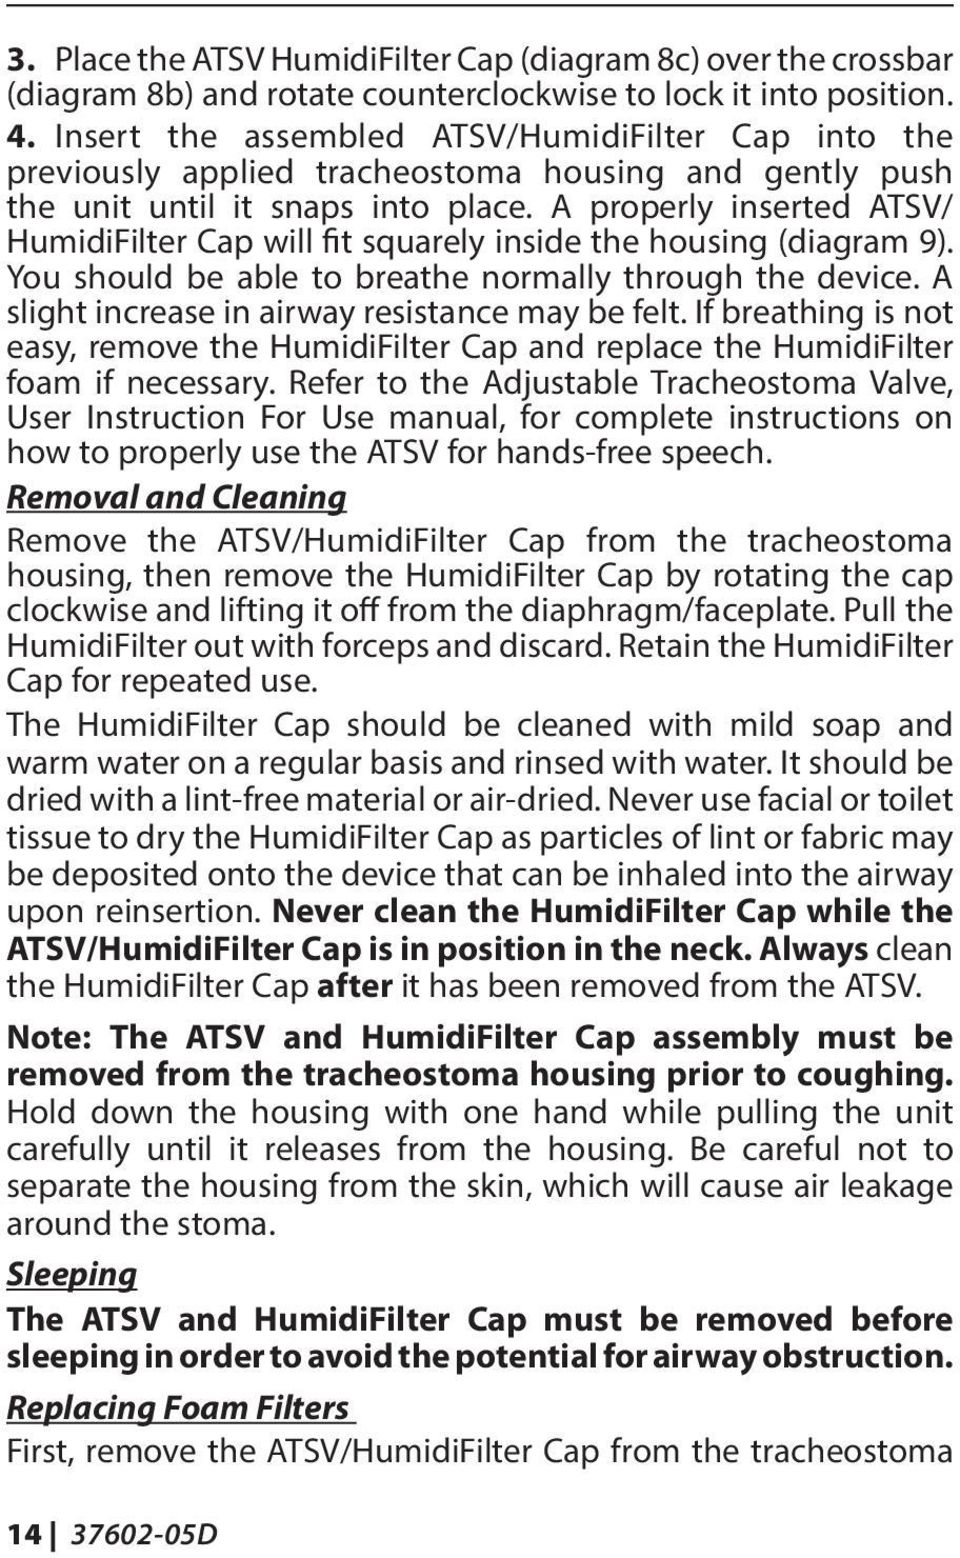 A properly inserted ATSV/ HumidiFilter Cap will fit squarely inside the housing (diagram 9). You should be able to breathe normally through the device.